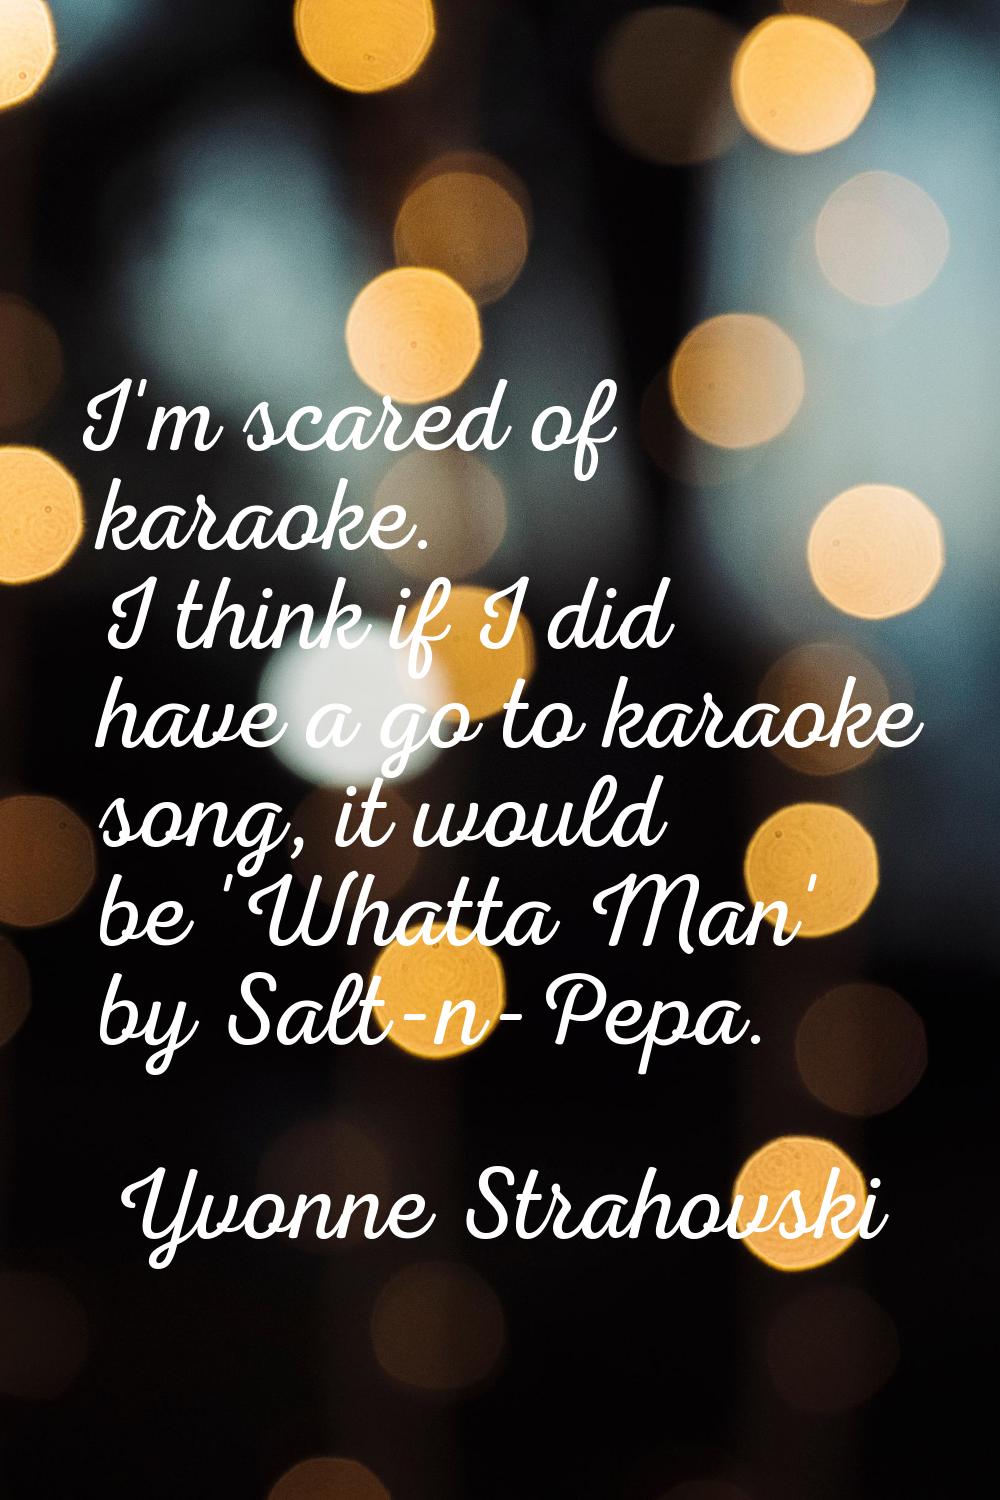 I'm scared of karaoke. I think if I did have a go to karaoke song, it would be 'Whatta Man' by Salt